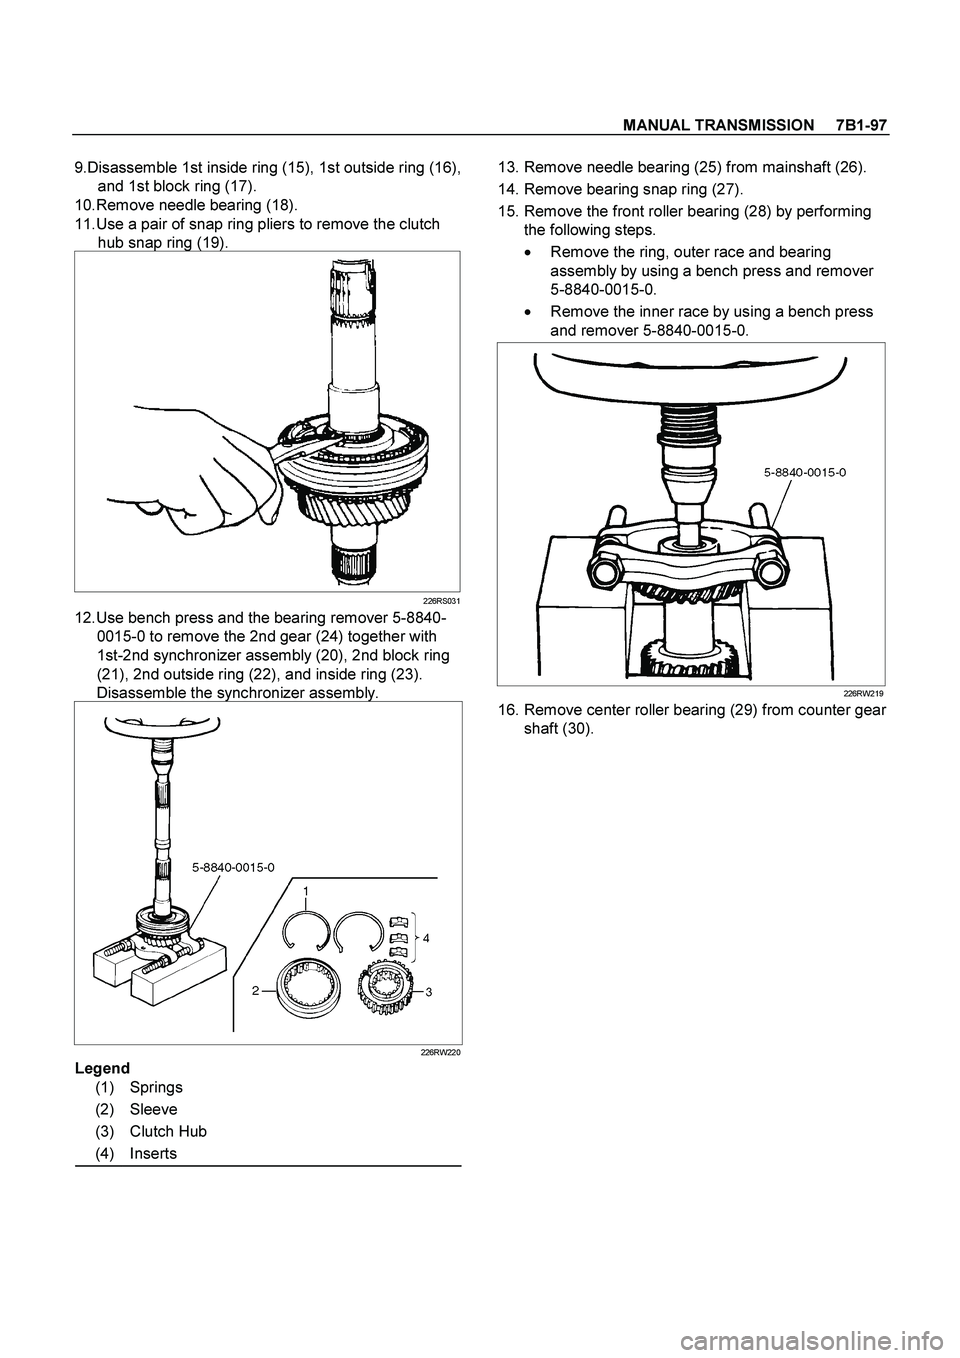 ISUZU TF SERIES 2004  Workshop Manual MANUAL TRANSMISSION     7B1-97
 
9.Disassemble 1st inside ring (15), 1st outside ring (16), 
and 1st block ring (17). 
10.Remove needle bearing (18). 
11.Use a pair of snap ring pliers to remove the c